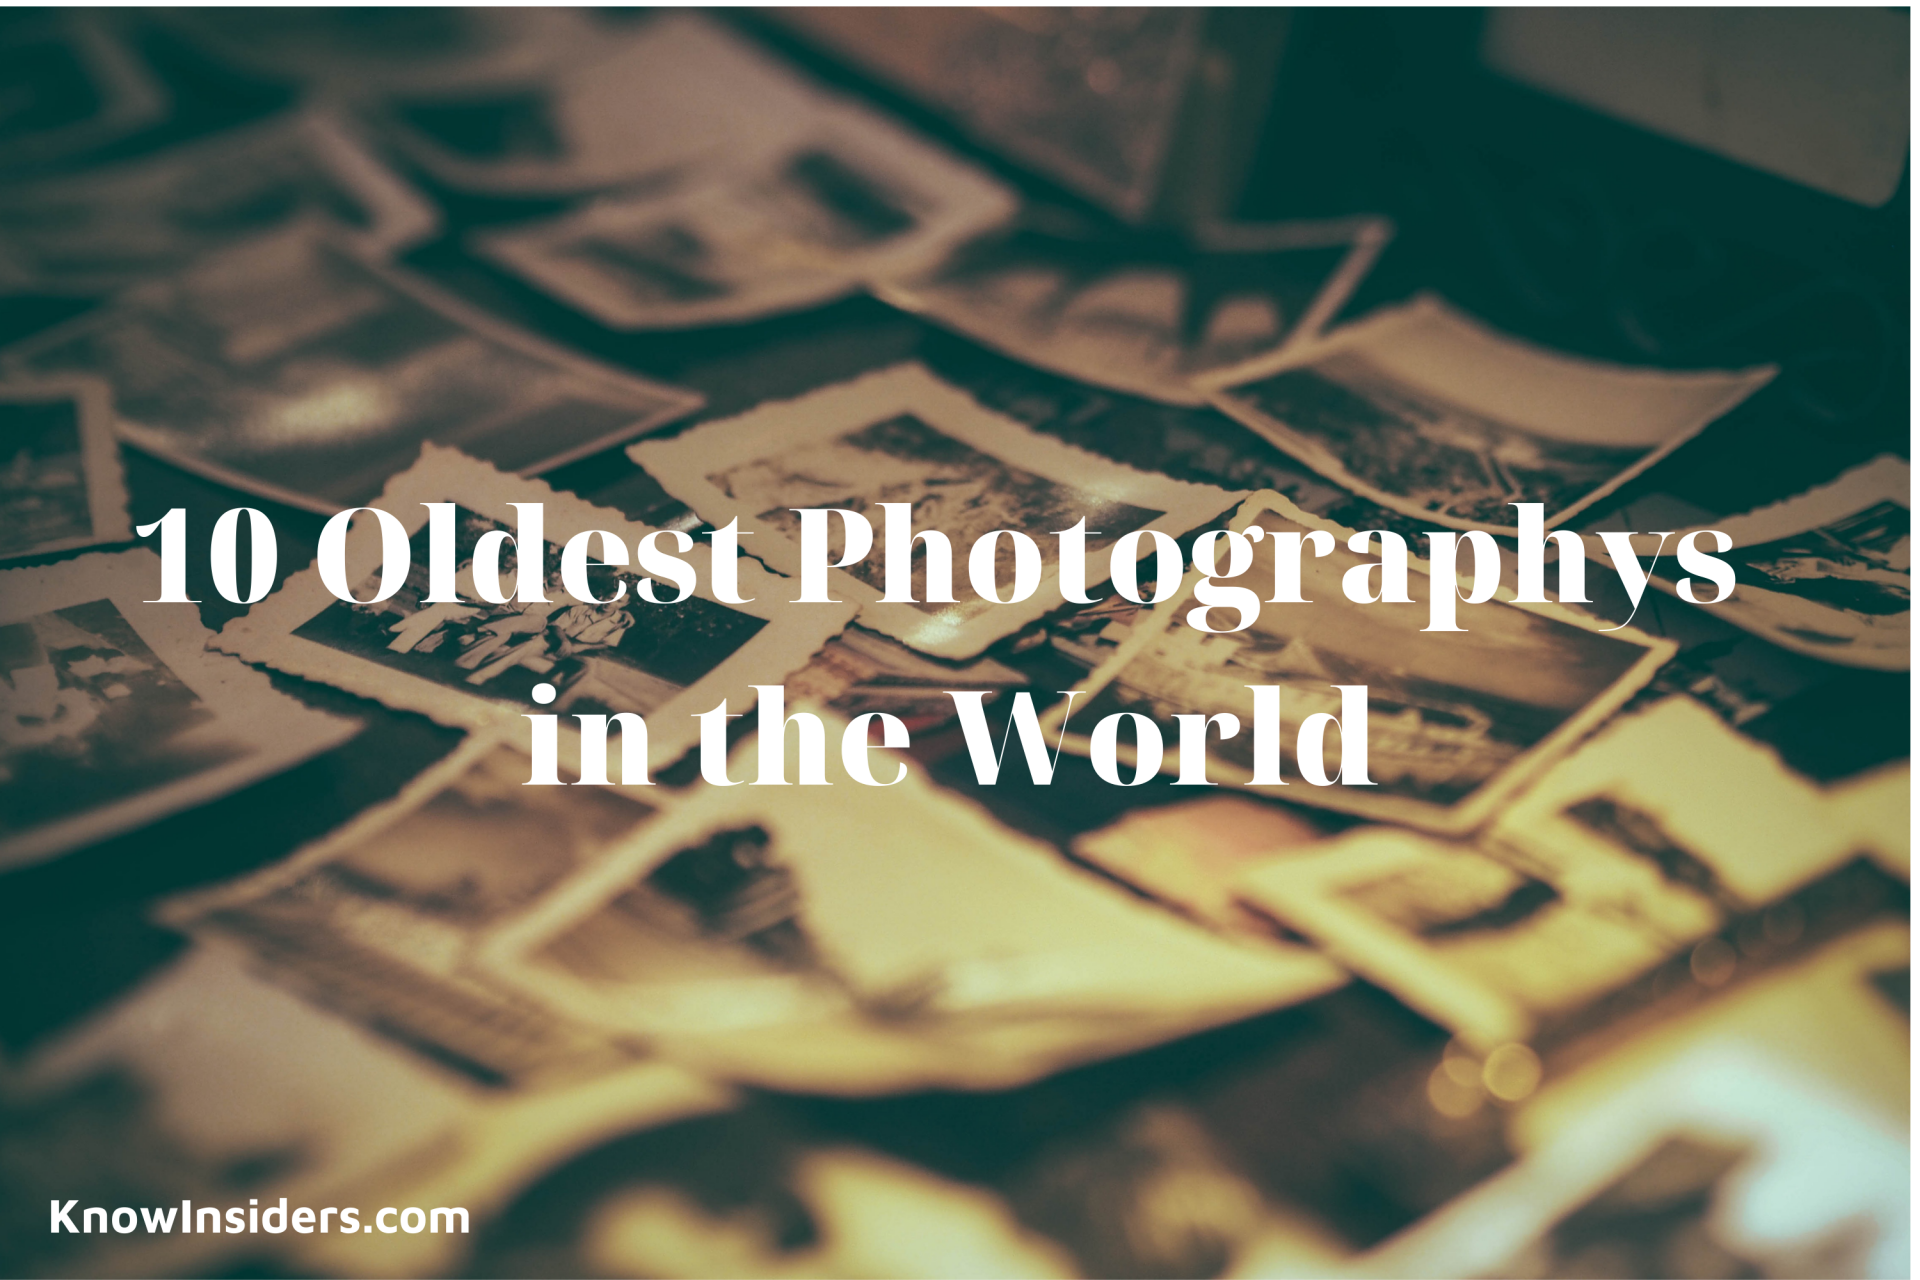 What Are The Oldest Photographs in the World - Top 10